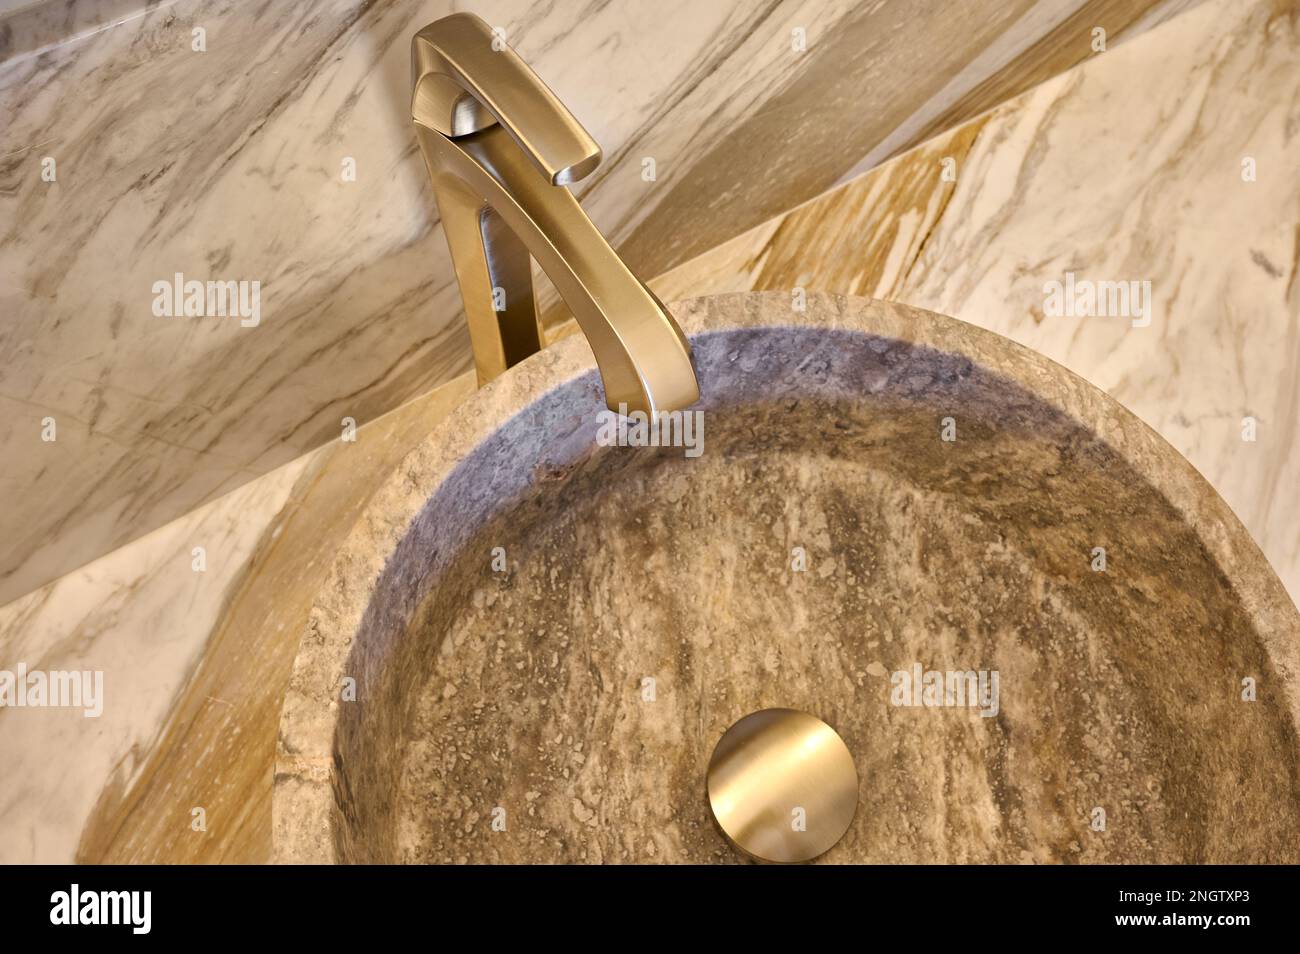 Closeup of Gold Faucet and round stone sink and countertop in bathroom Stock Photo